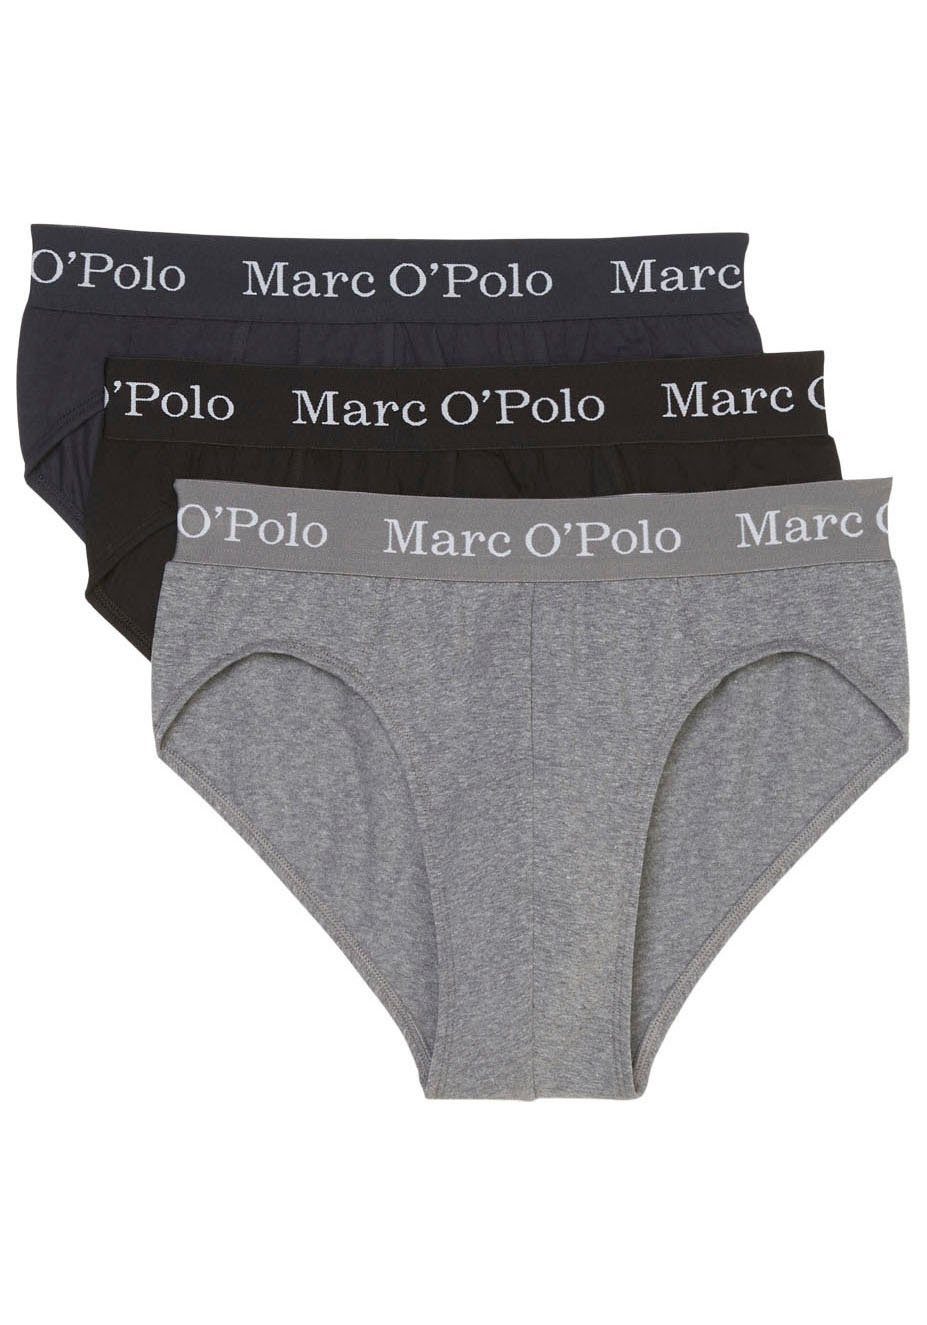 Marc Jersey Slip 3-St) Elements mix Qualität Softe O'Polo (Packung,